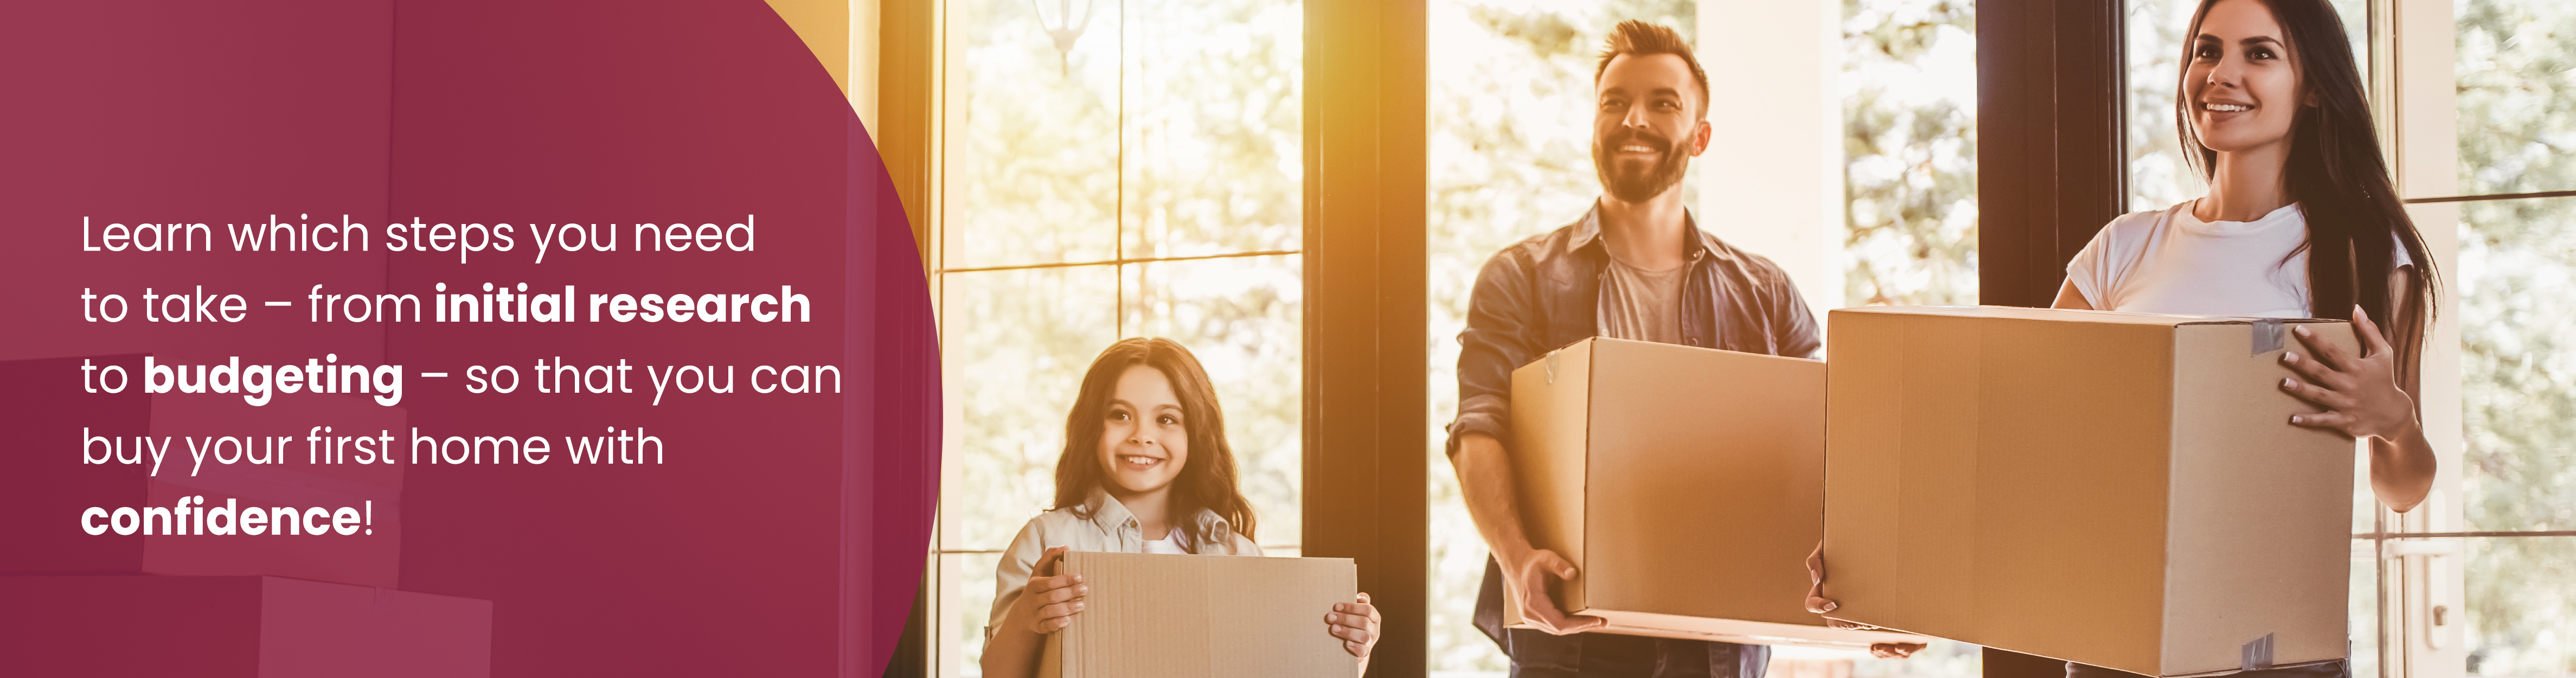 People holding moving boxes. Text: Learn which steps you need to take - from initial research to budgeting - so that you can buy your first home with confidence!